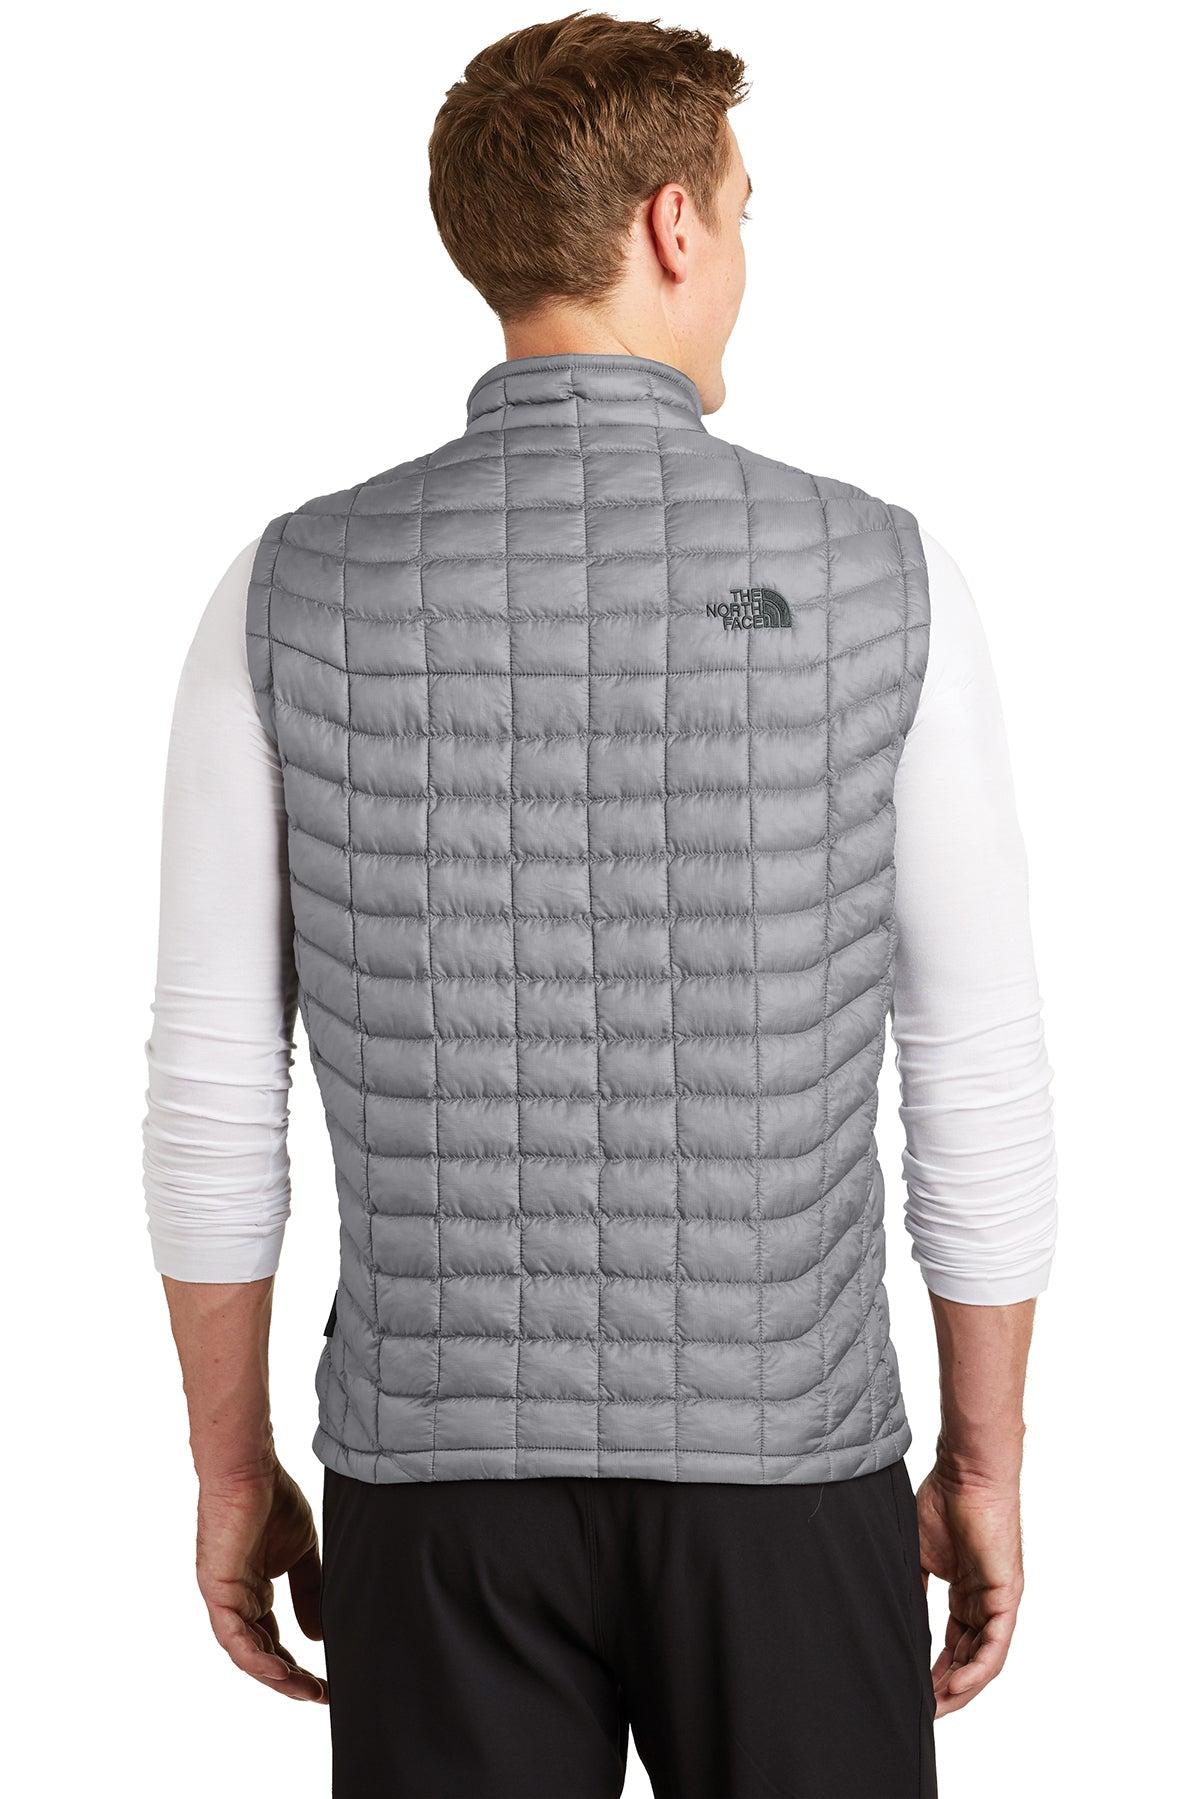 the north face_nf0a3lhd _mid grey_company_logo_jackets